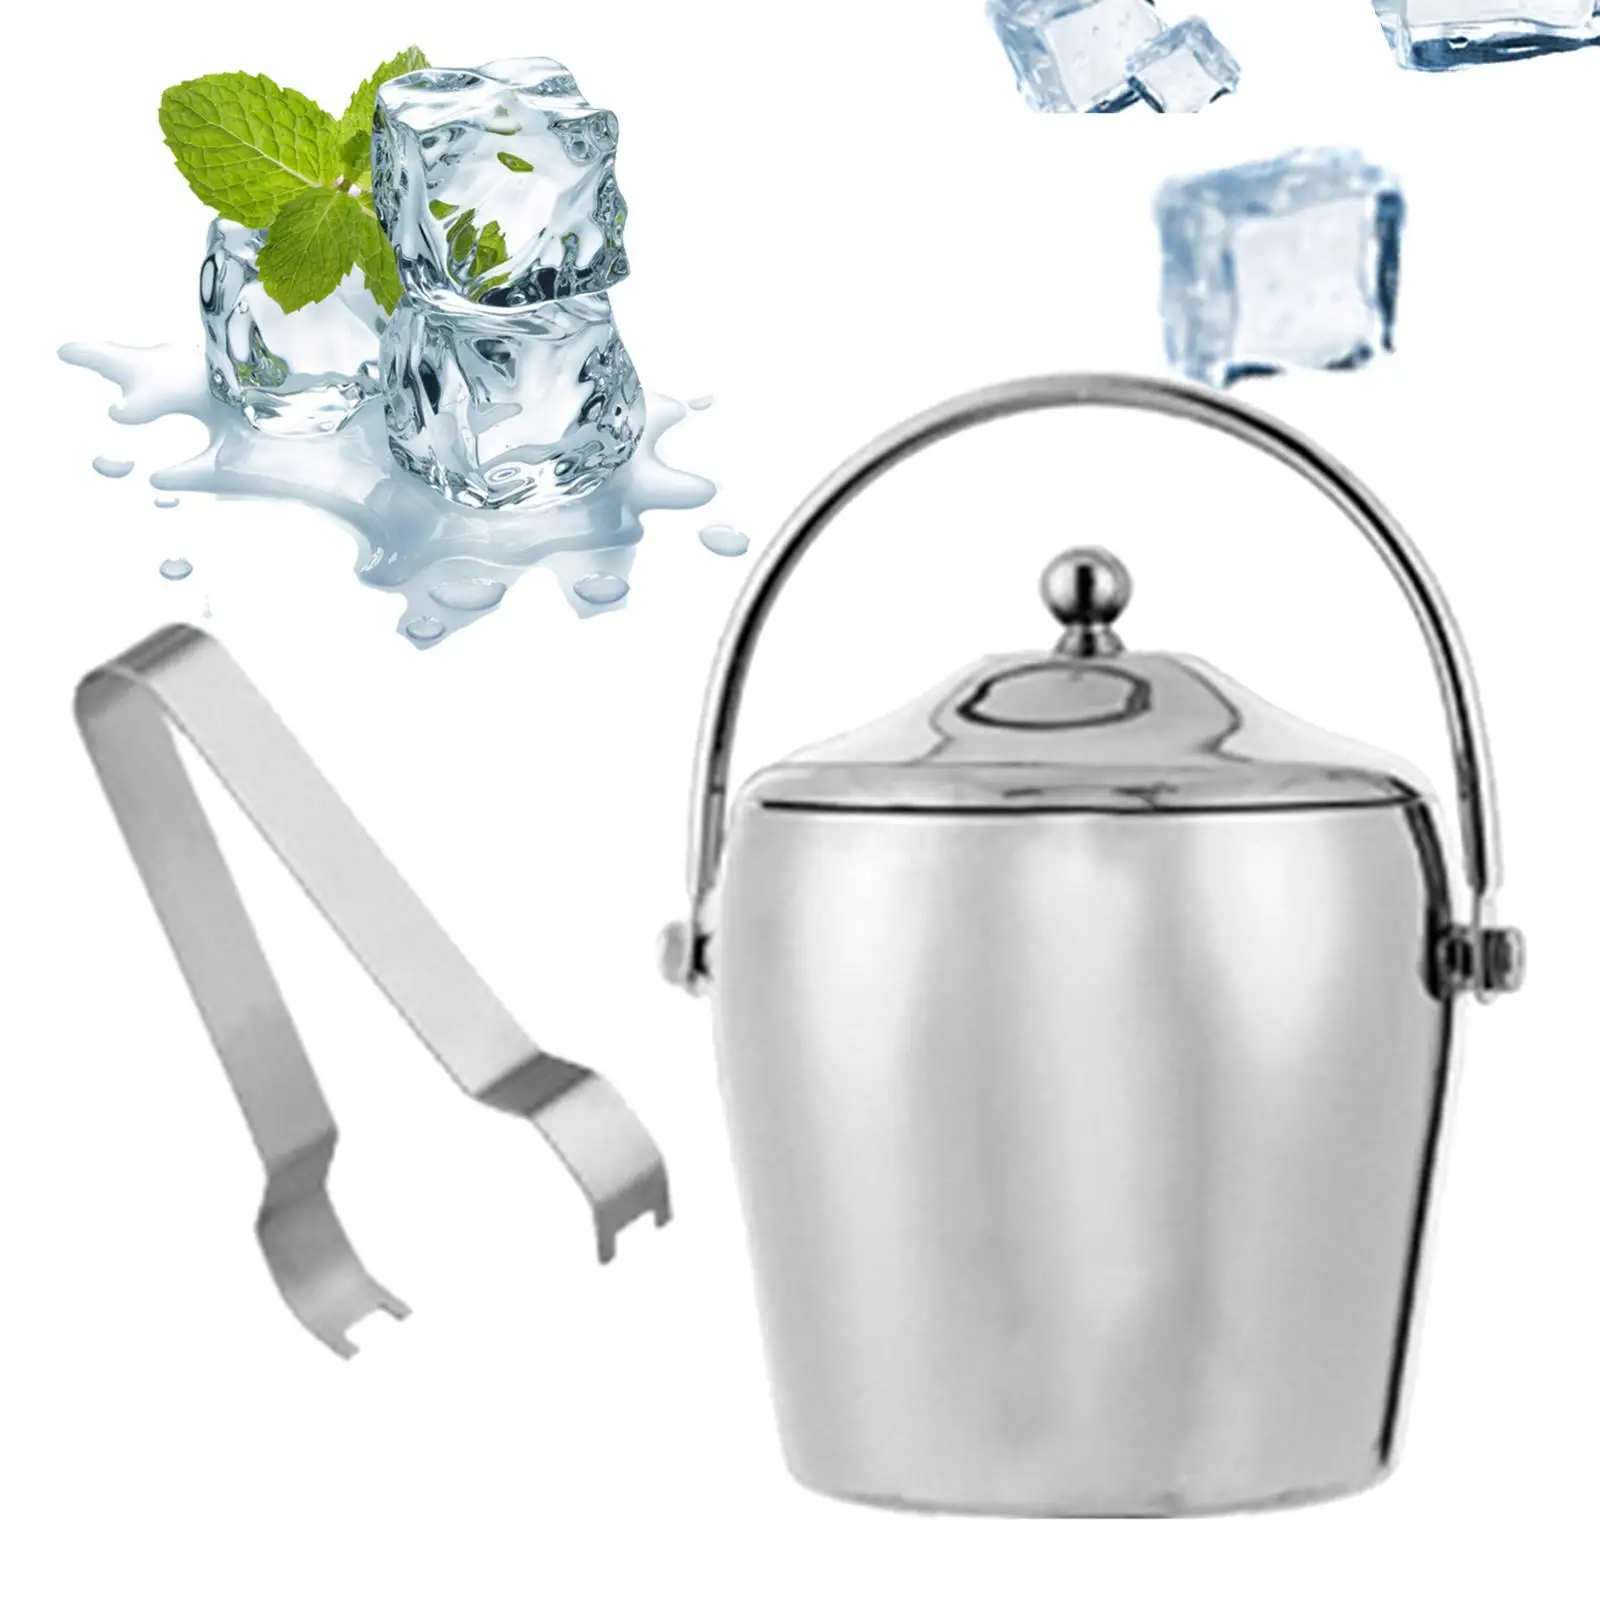 Metal Beverage Tub Fashionable with Handle Champagne Bucket Insulated Ice Bucket for Barbecue Party Bar Household Drinks